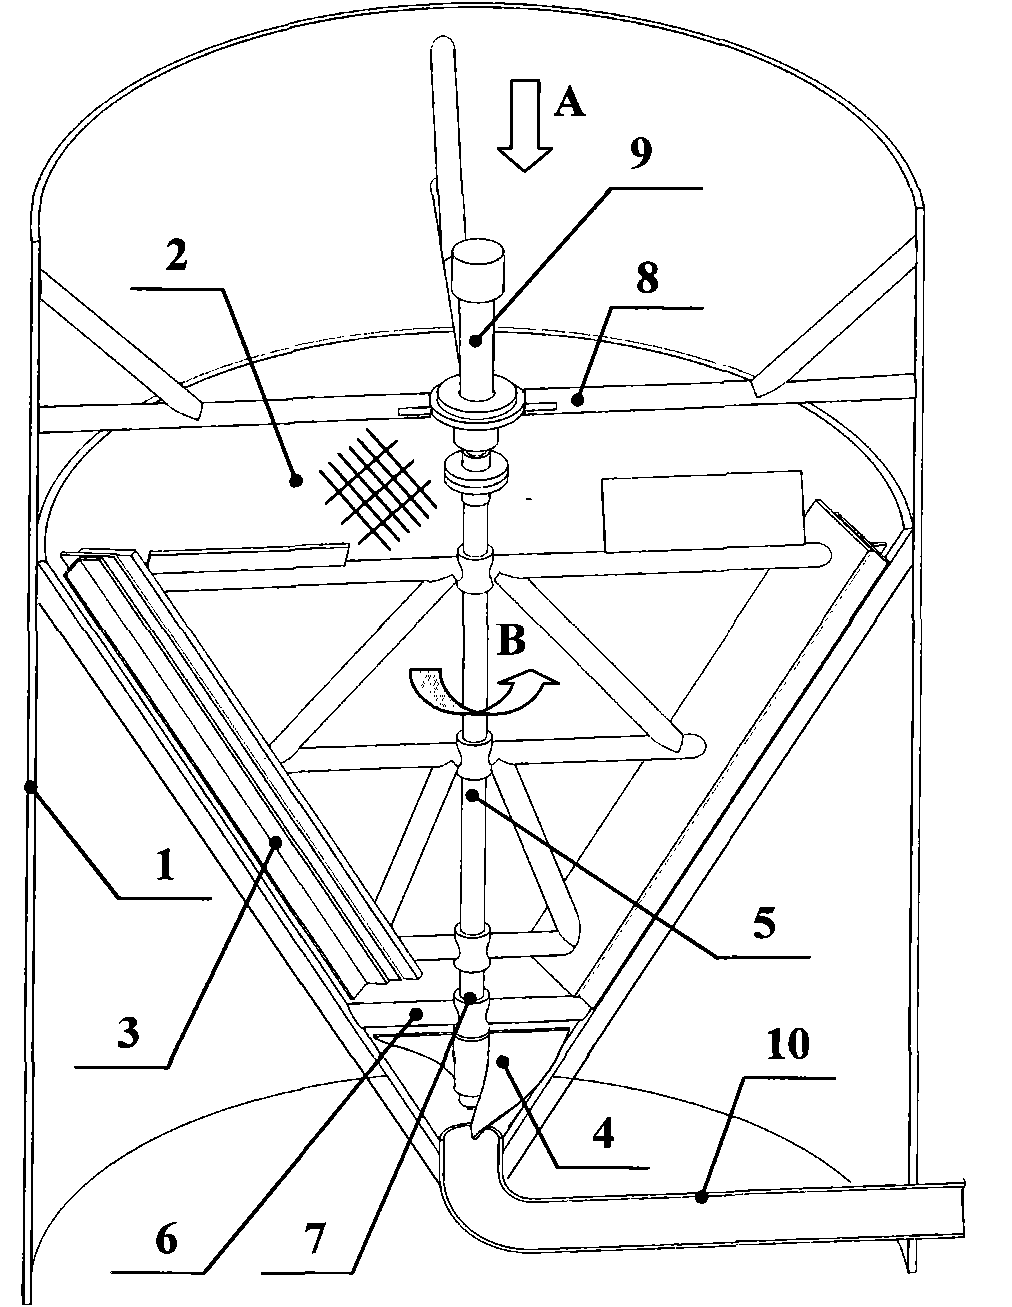 Self-rotating clean collecting device